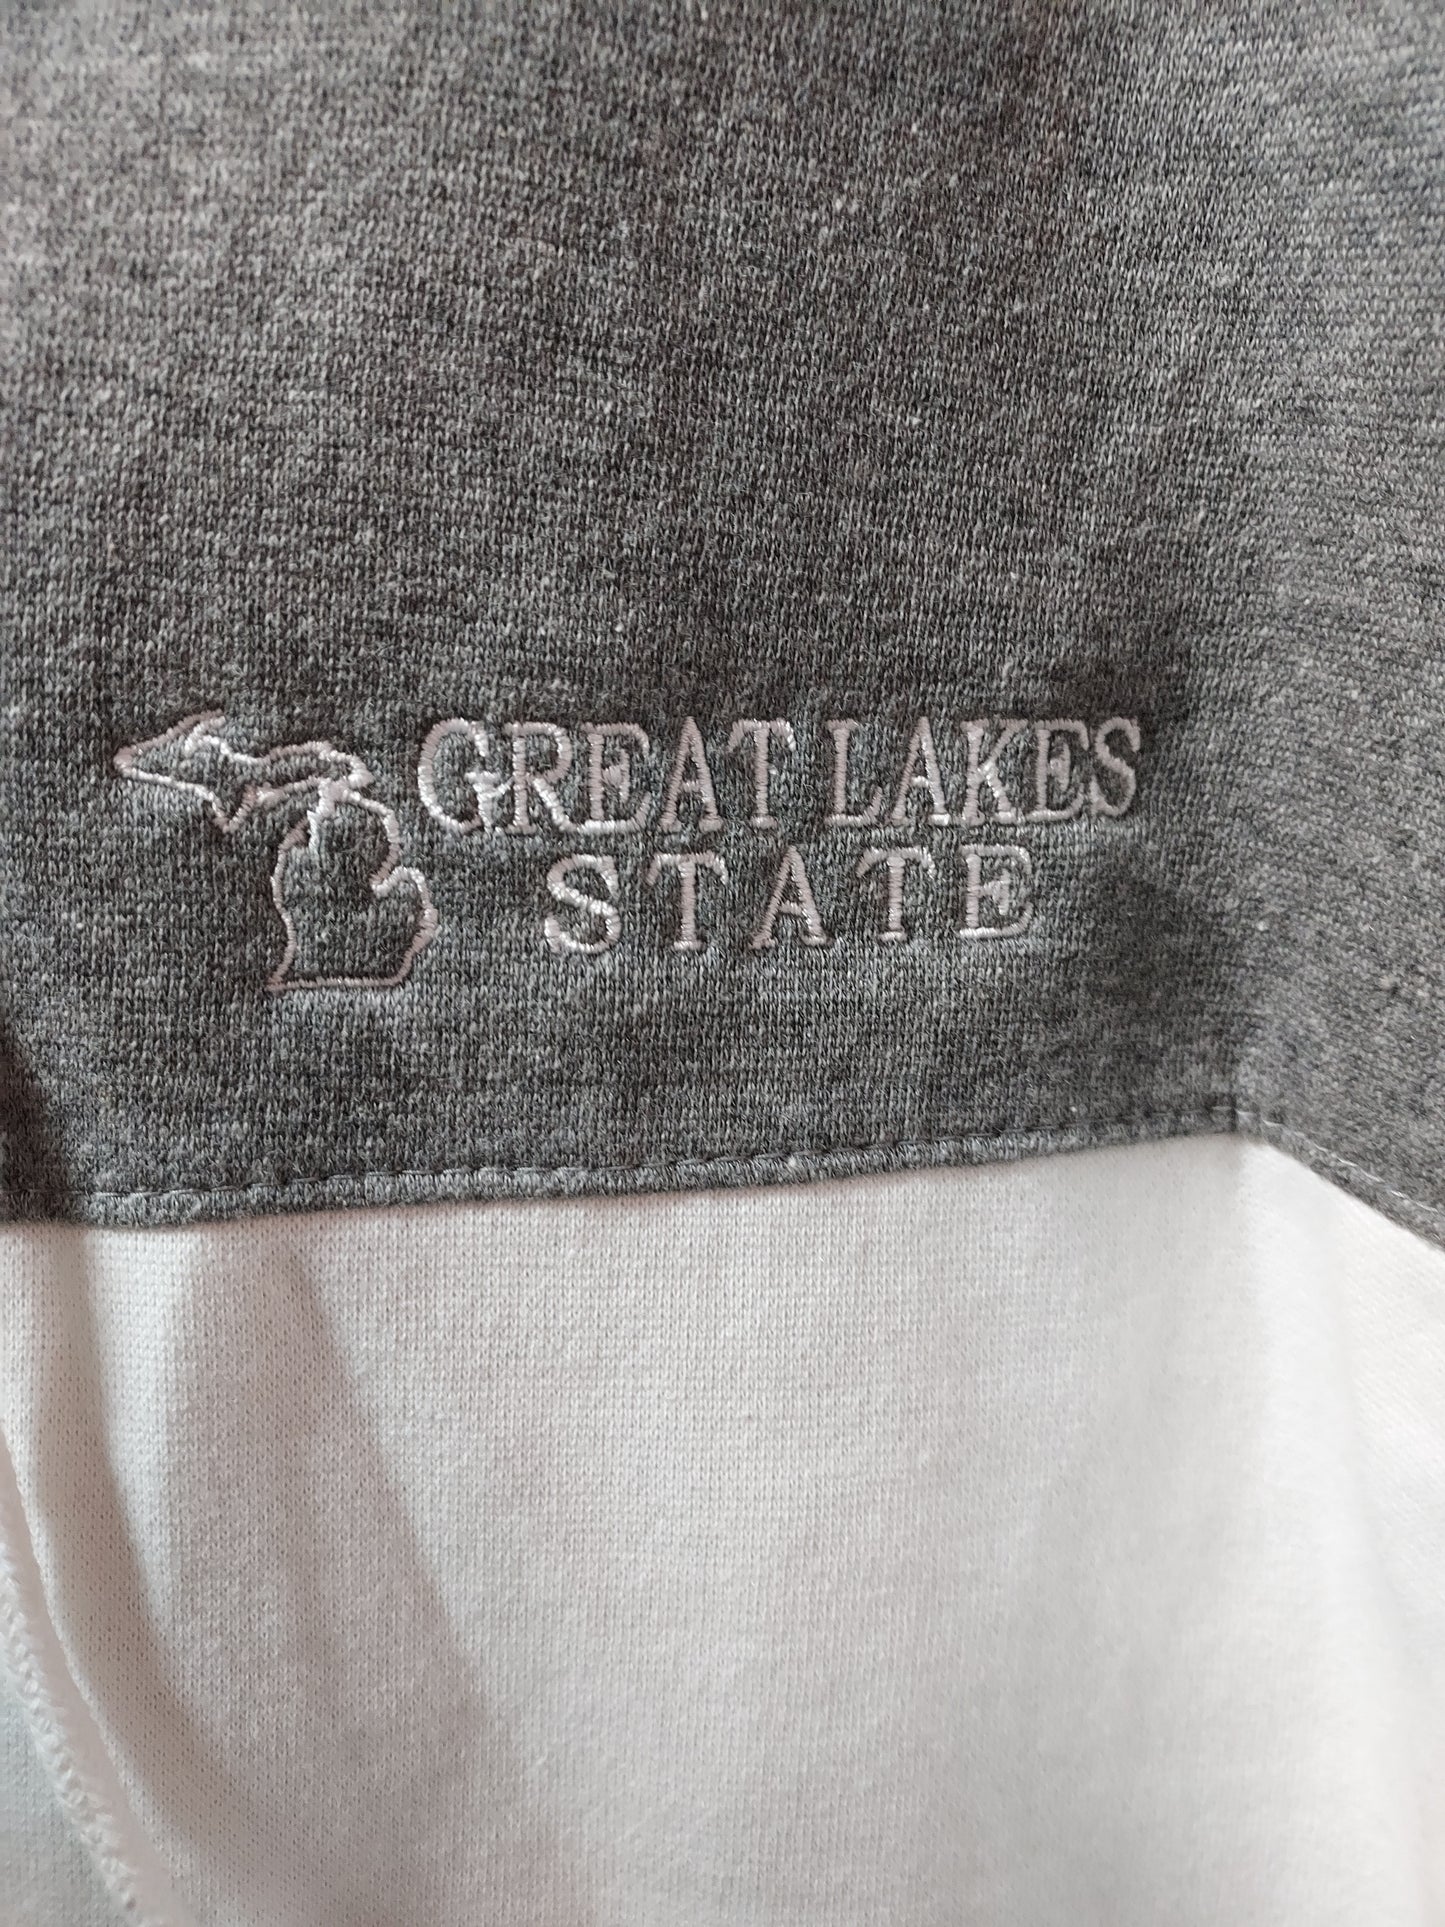 Great Lakes State Graphite Classic Fleece Colorblocked Hooded Sweatshirt